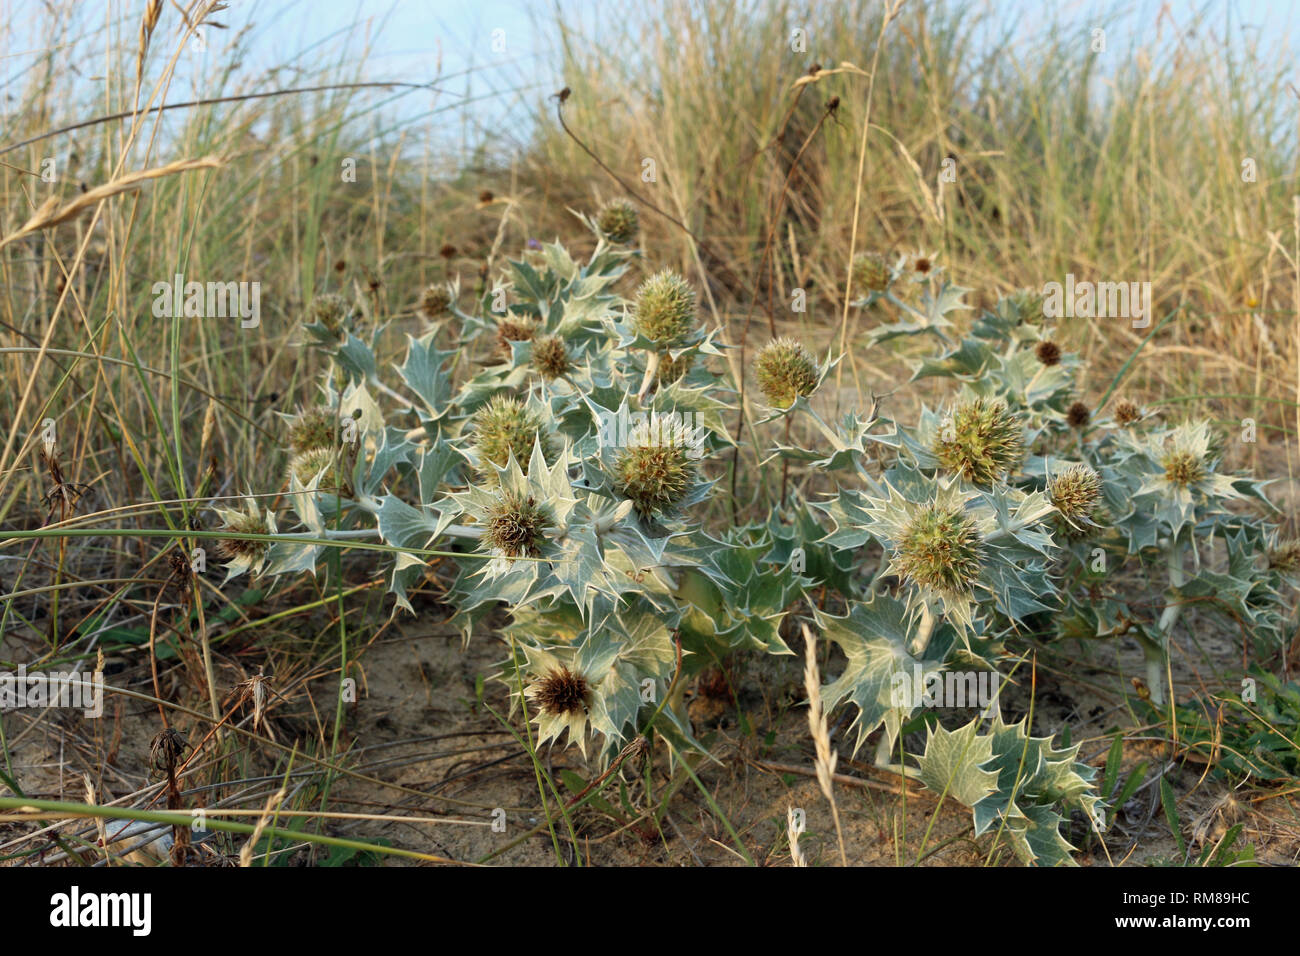 Native UK sea holly, Eryngium maritimum, in flower and growing on a sand dune with grass and sky in the background. Stock Photo